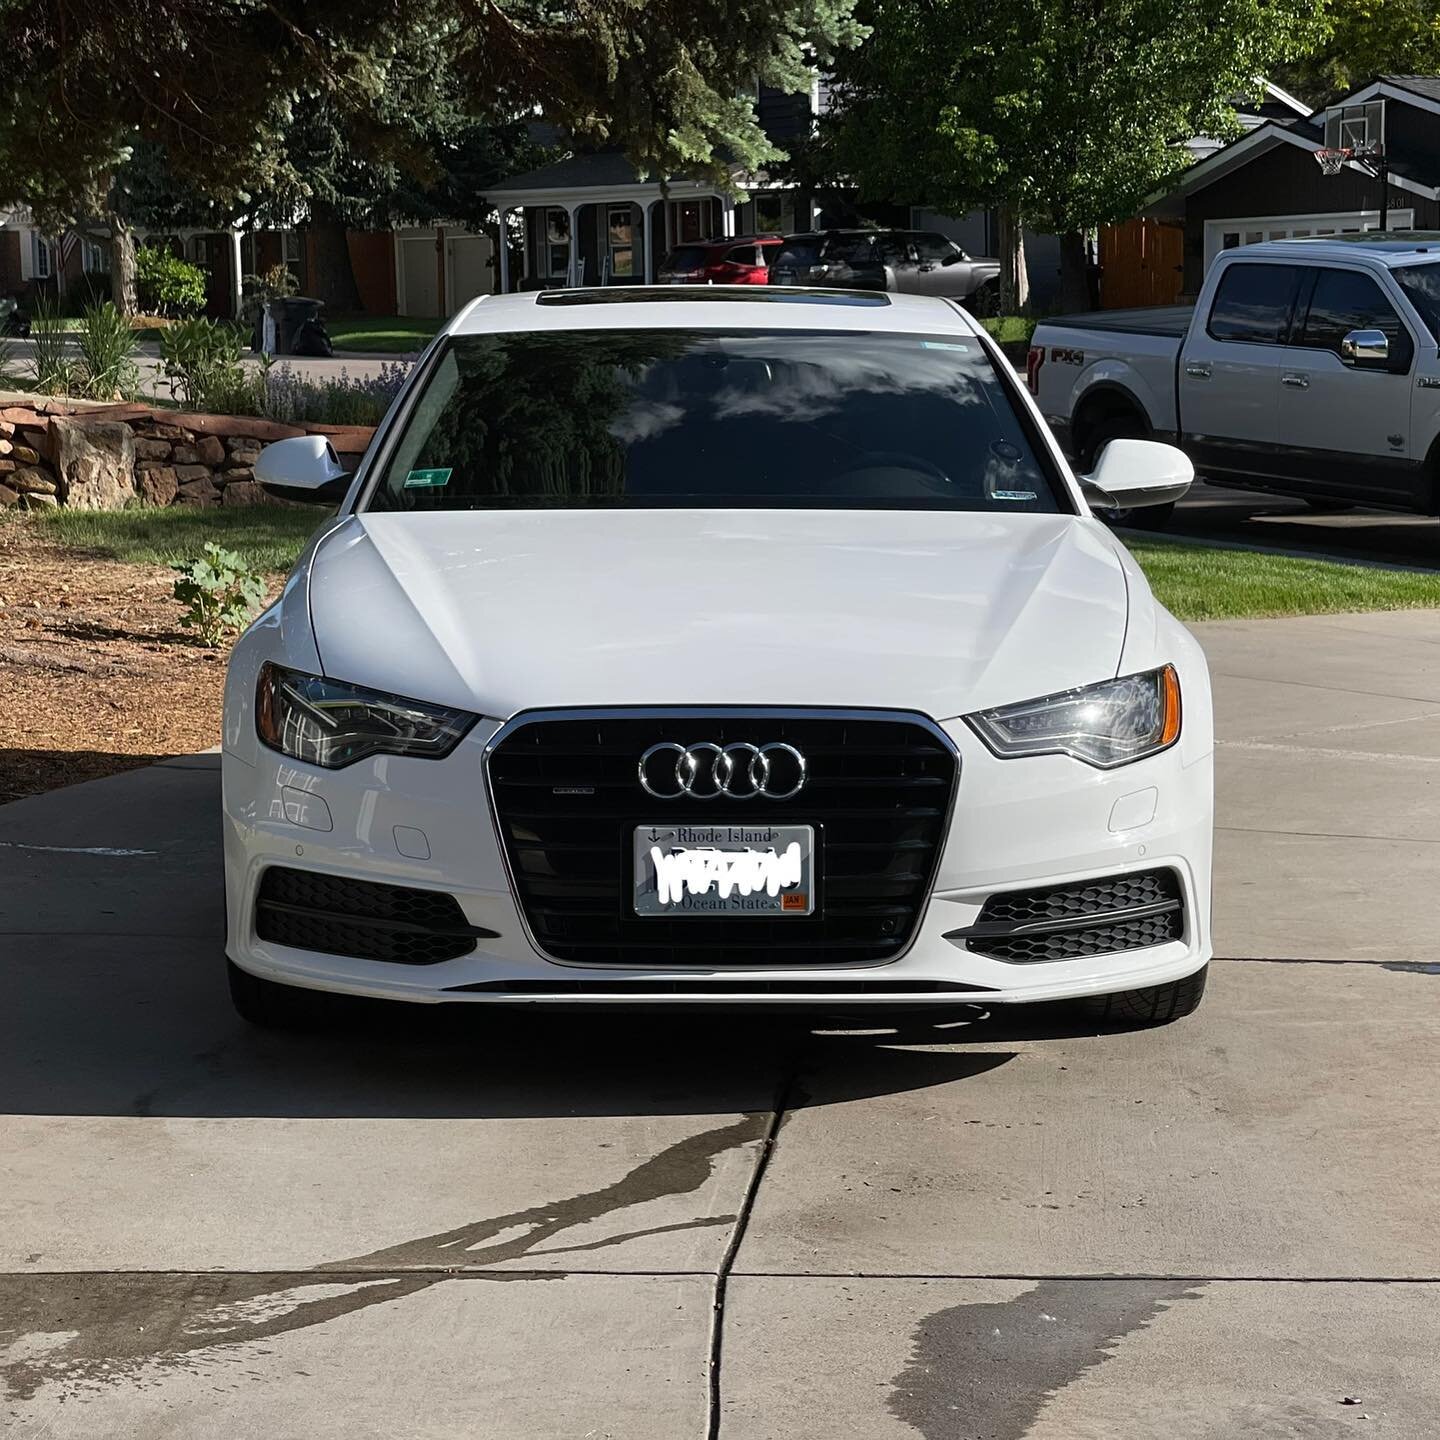 This Audi A6 came in for a thorough detail to prepare to be sold. Now it&rsquo;s ready to get top $ for its owner!